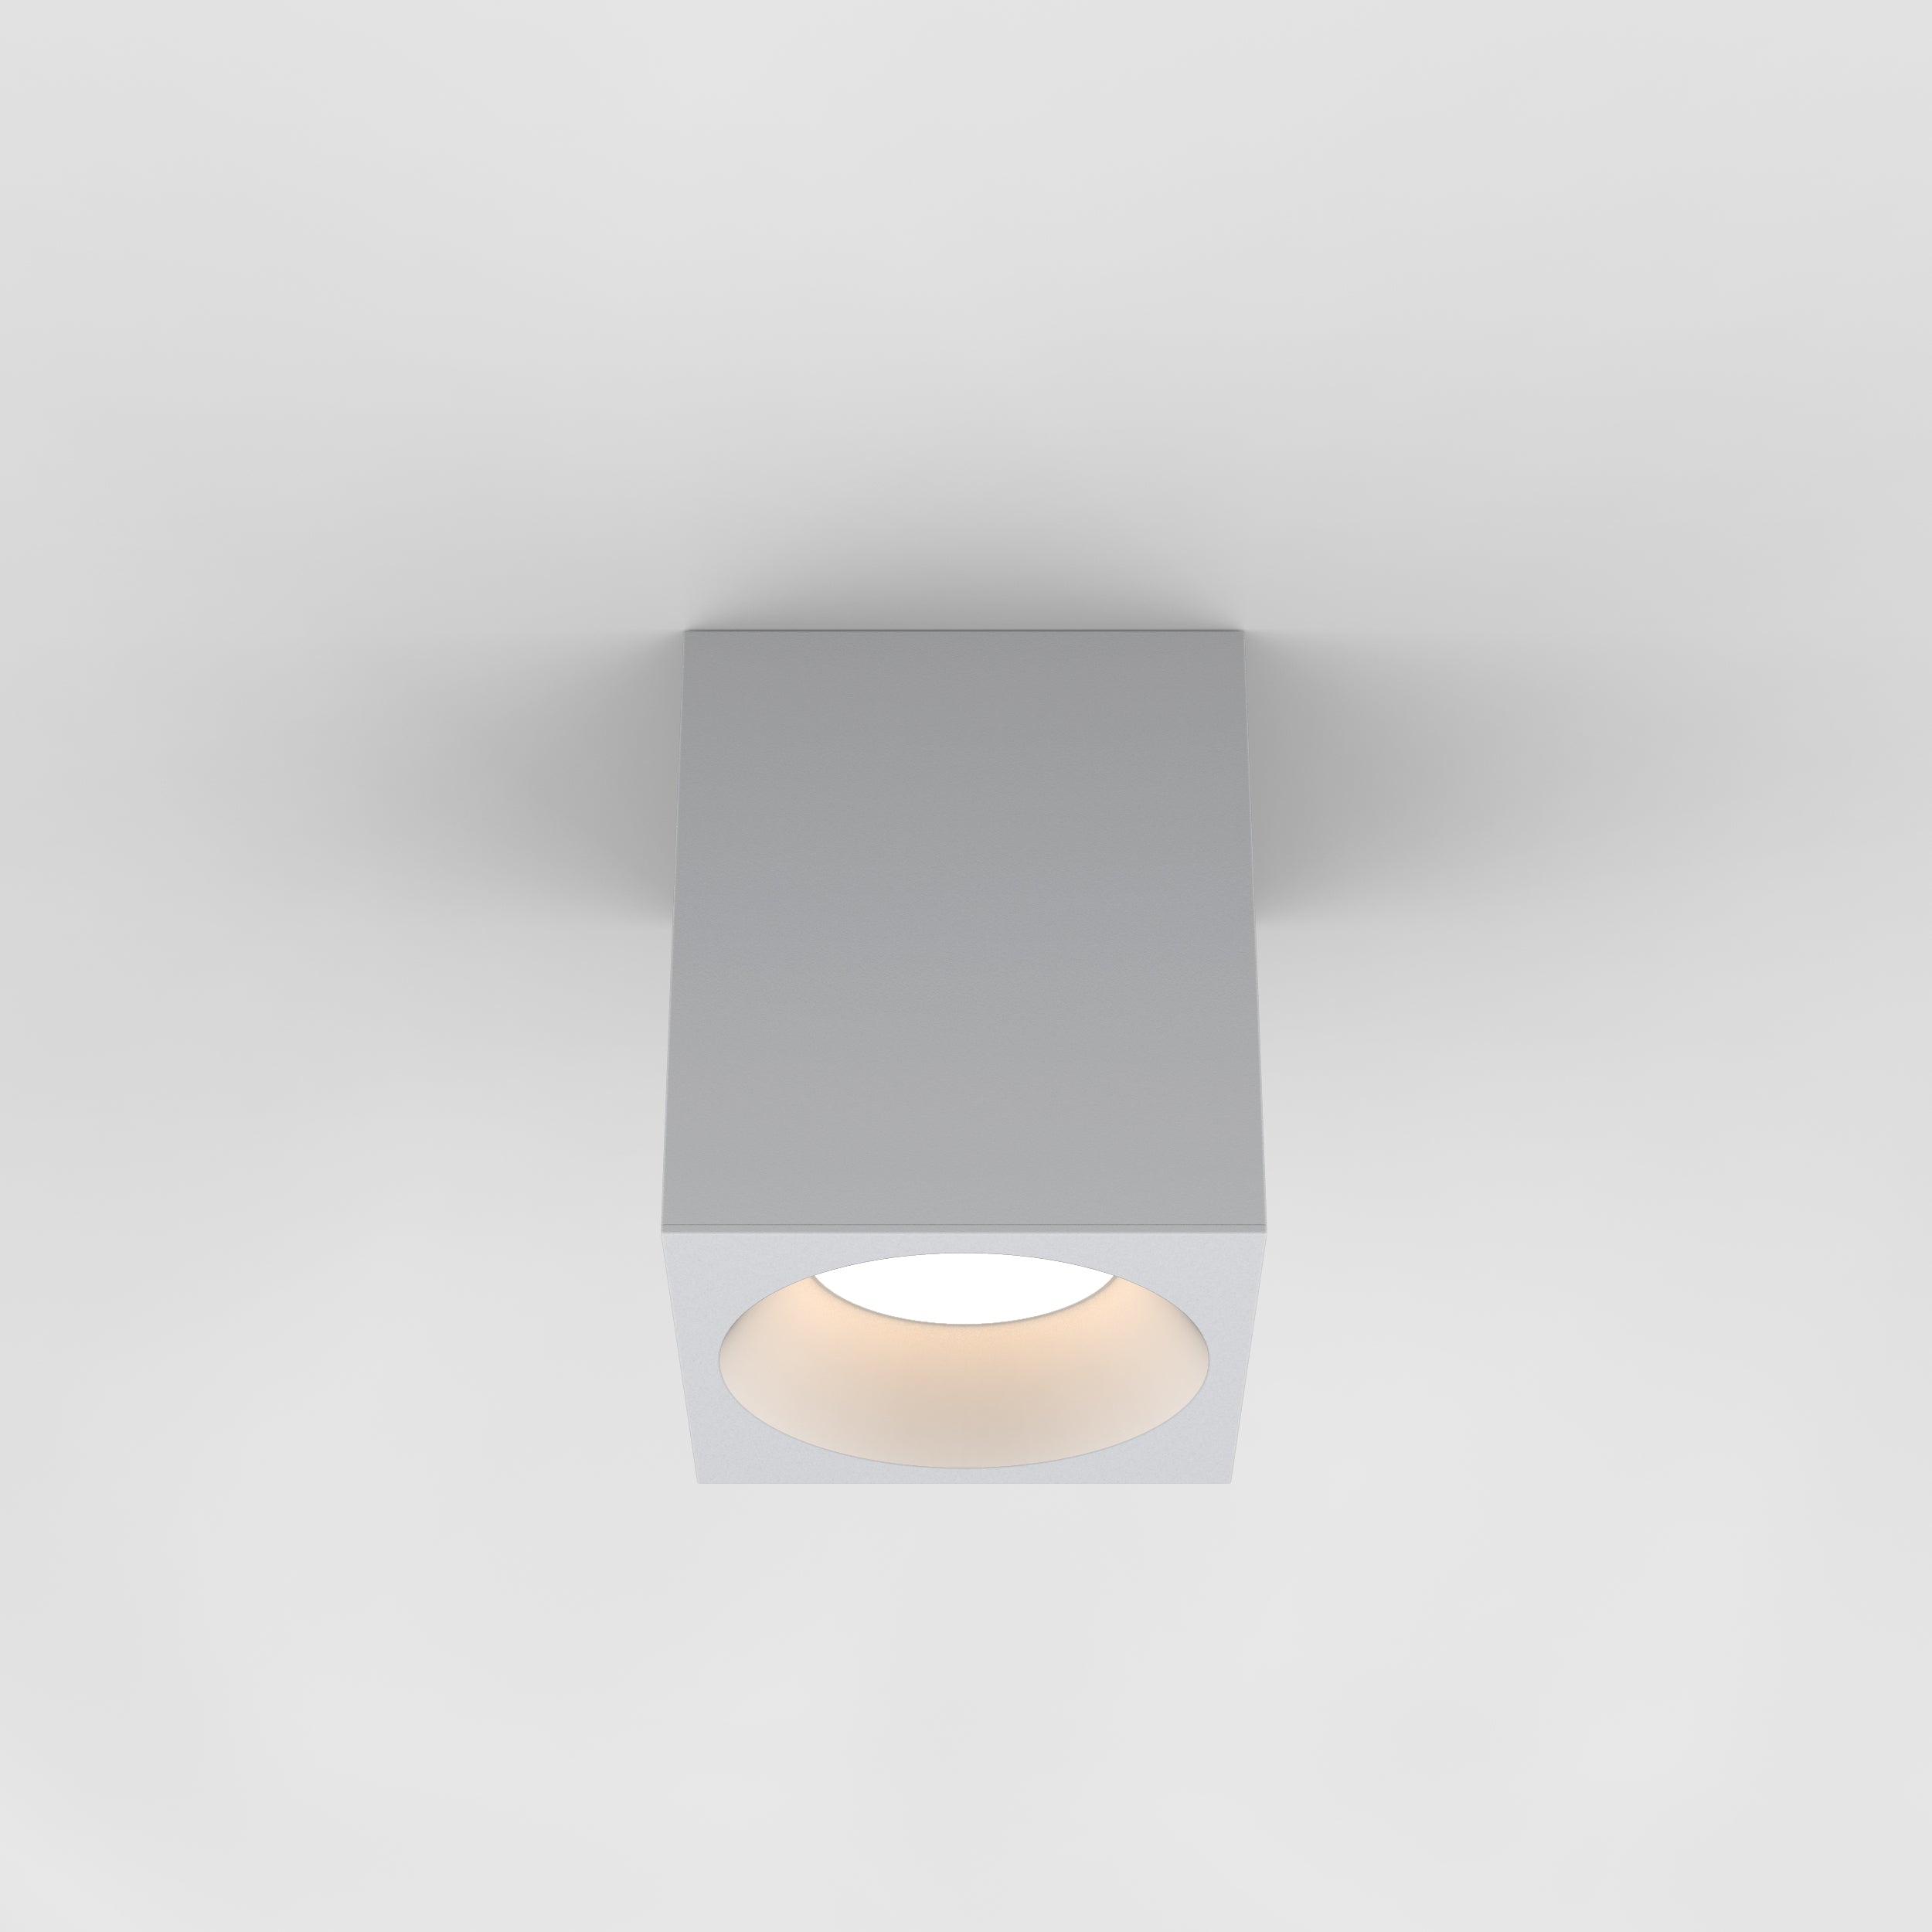 Astro Lighting Kos Square Recessed Astro Lighting 4.53x4.53x5.59 Textured White Yes (Integral), AC LED Module